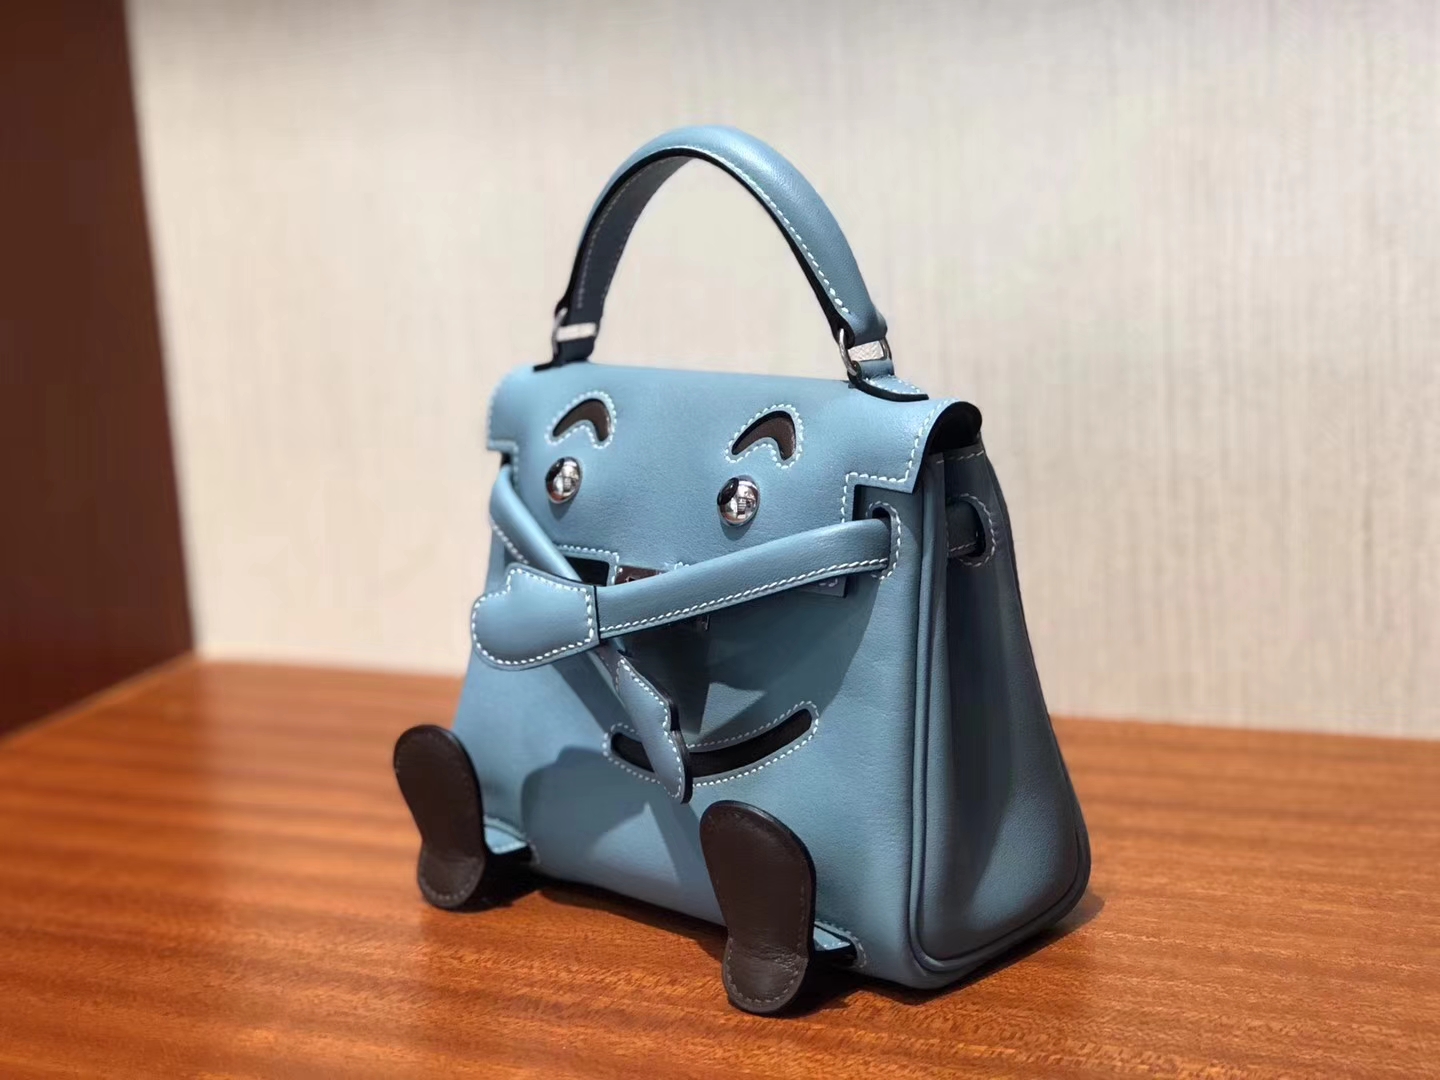 Lovely Hermes Calf Leather Kell Doll Tote Bag in Blue Jean Silver Hardware